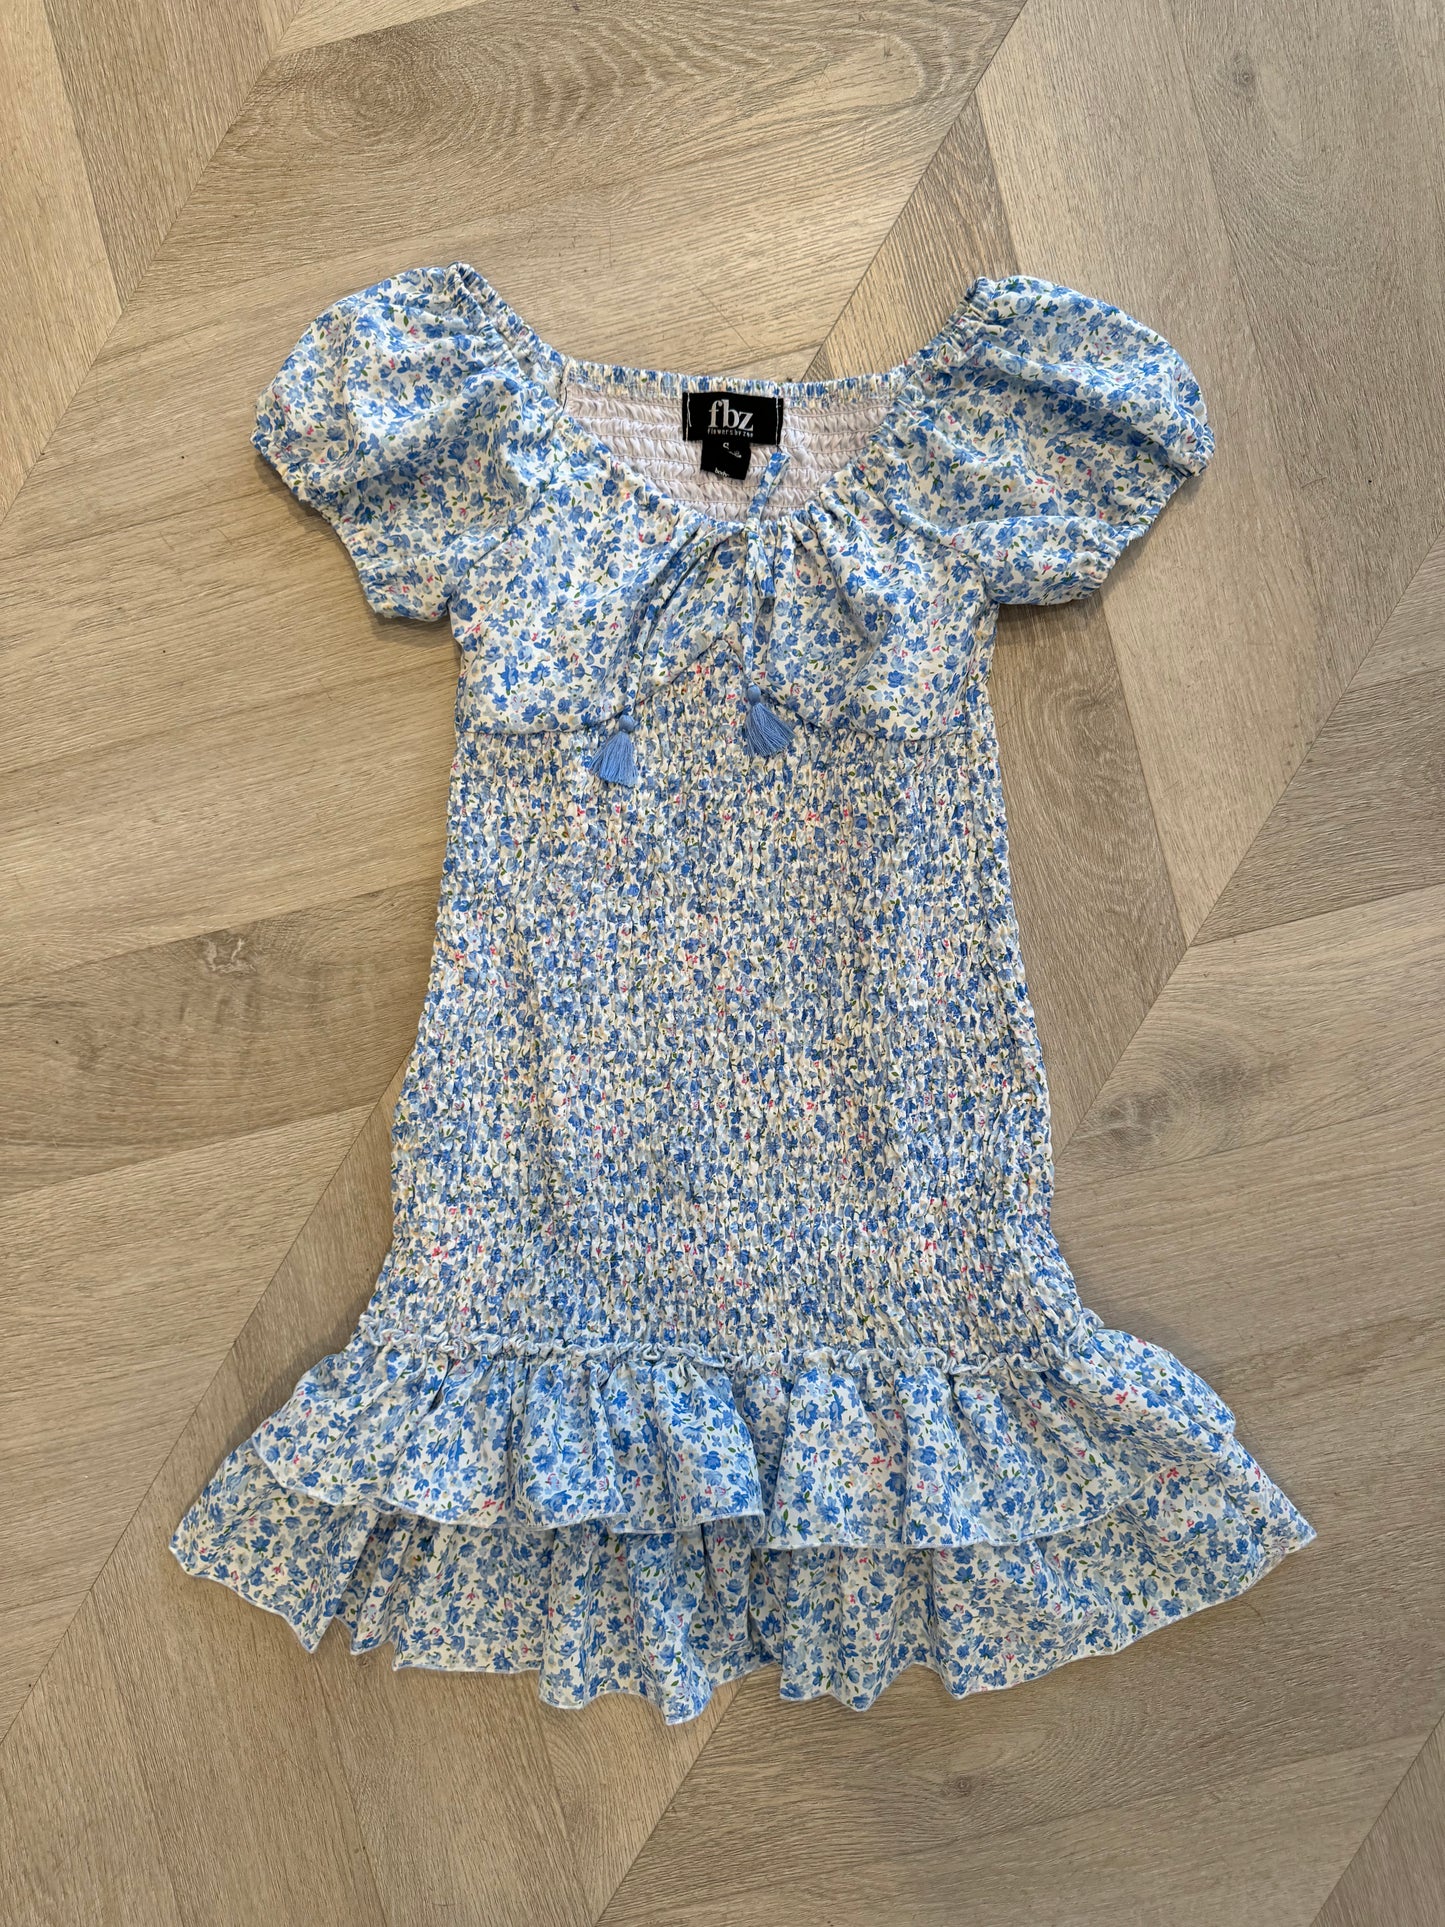 FBZ Flowers by Zoe Floral Puff-Sleeve Smocked Dress